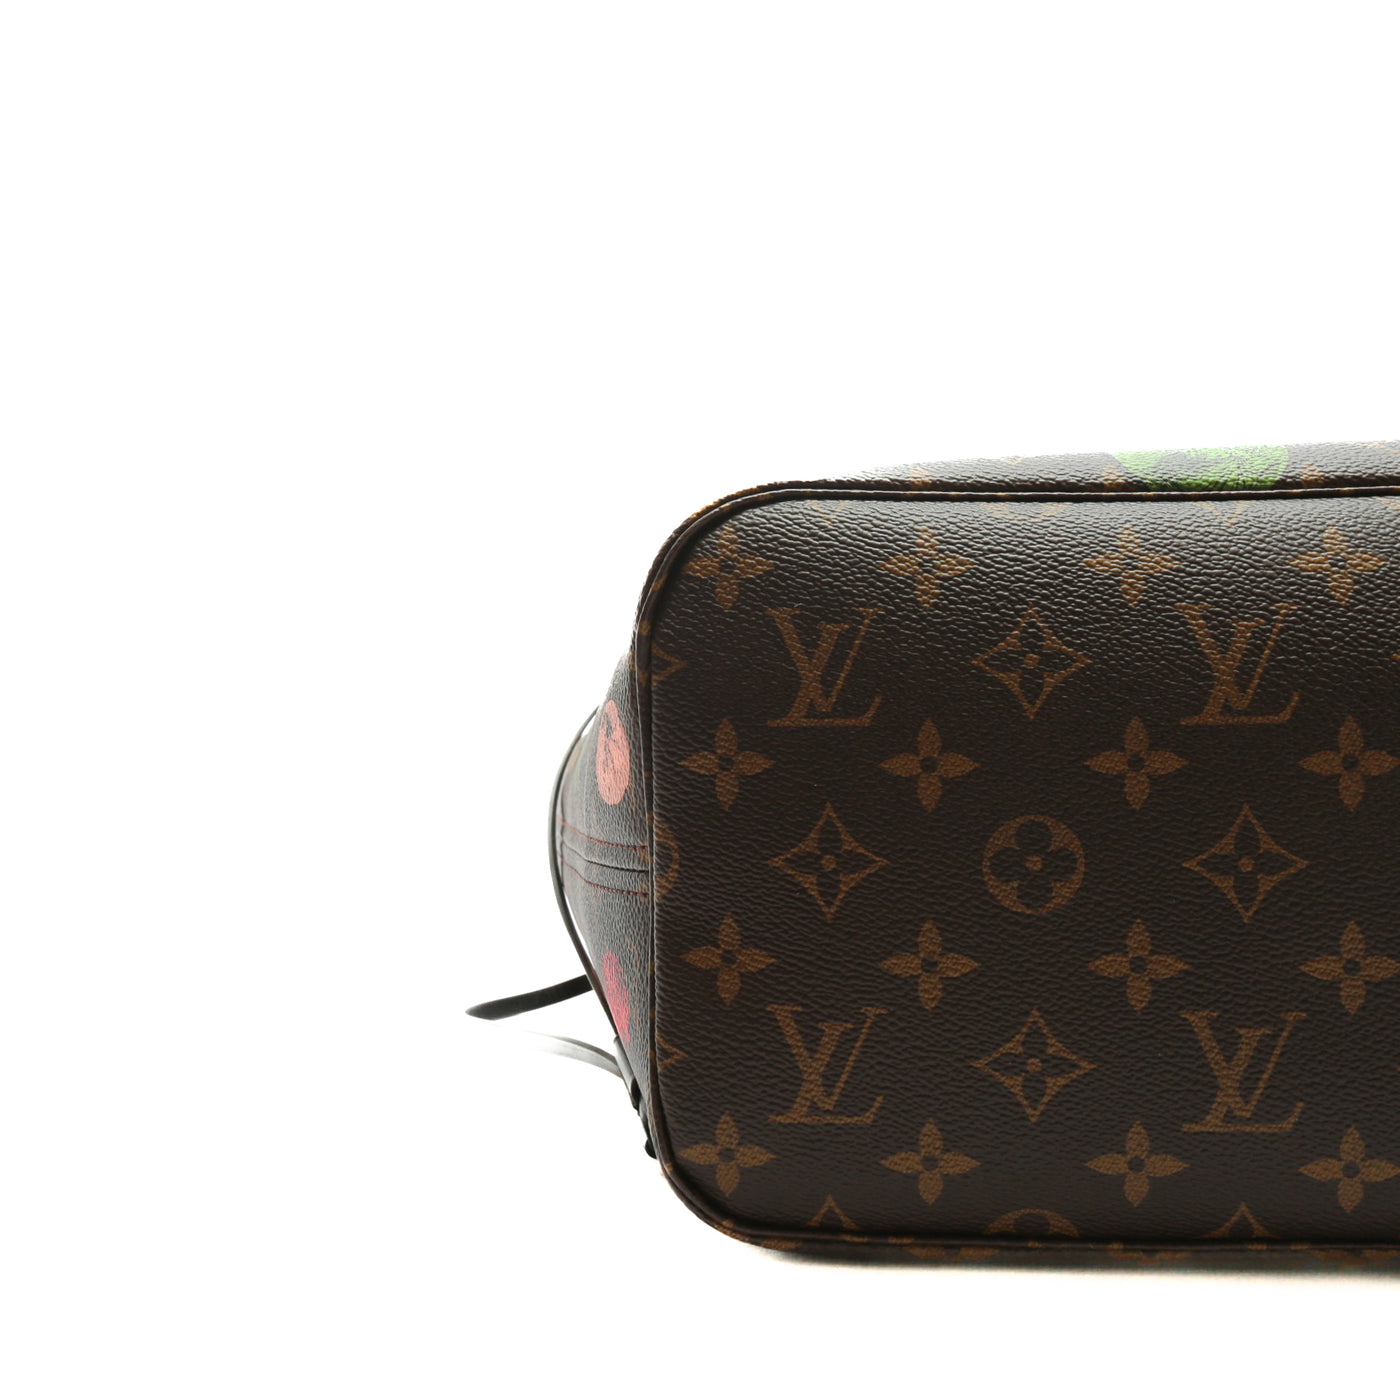 LOUIS VUITTON X FORNASETTI Monogram Cameo Neverfull MM No Pouch